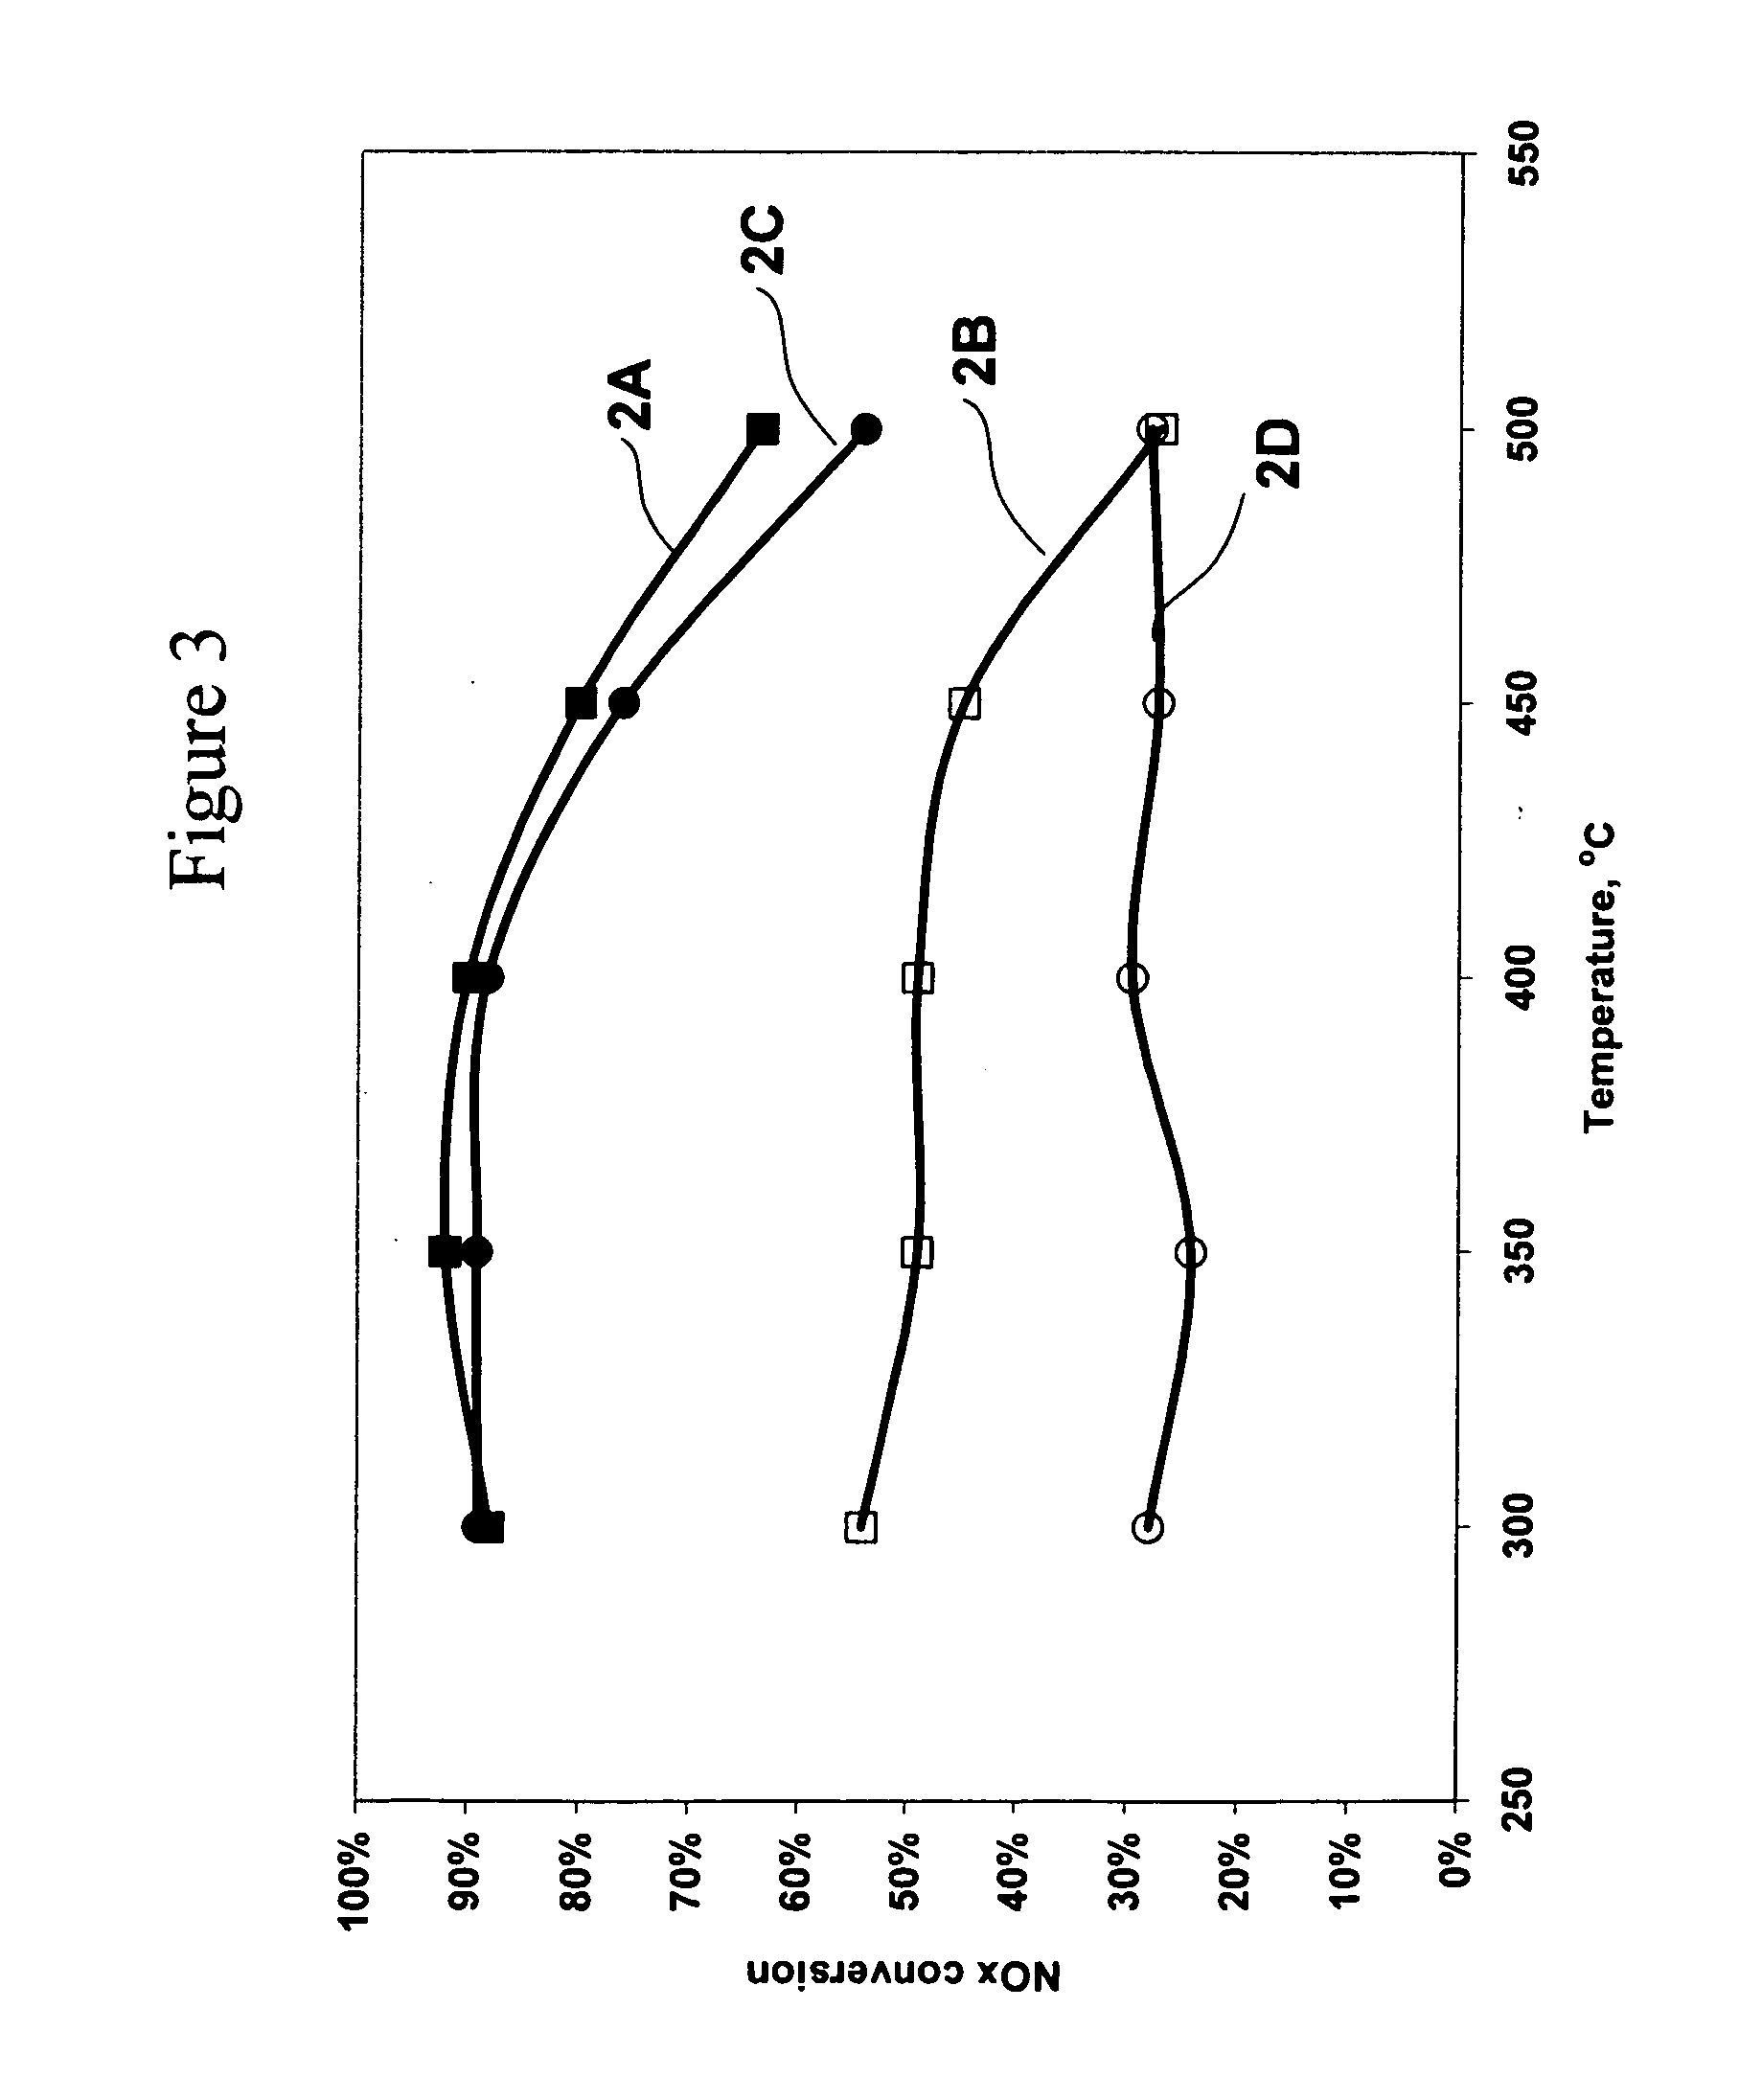 Catalyst and method for reducing nitrogen oxides in exhaust streams with hydrocarbons or alcohols